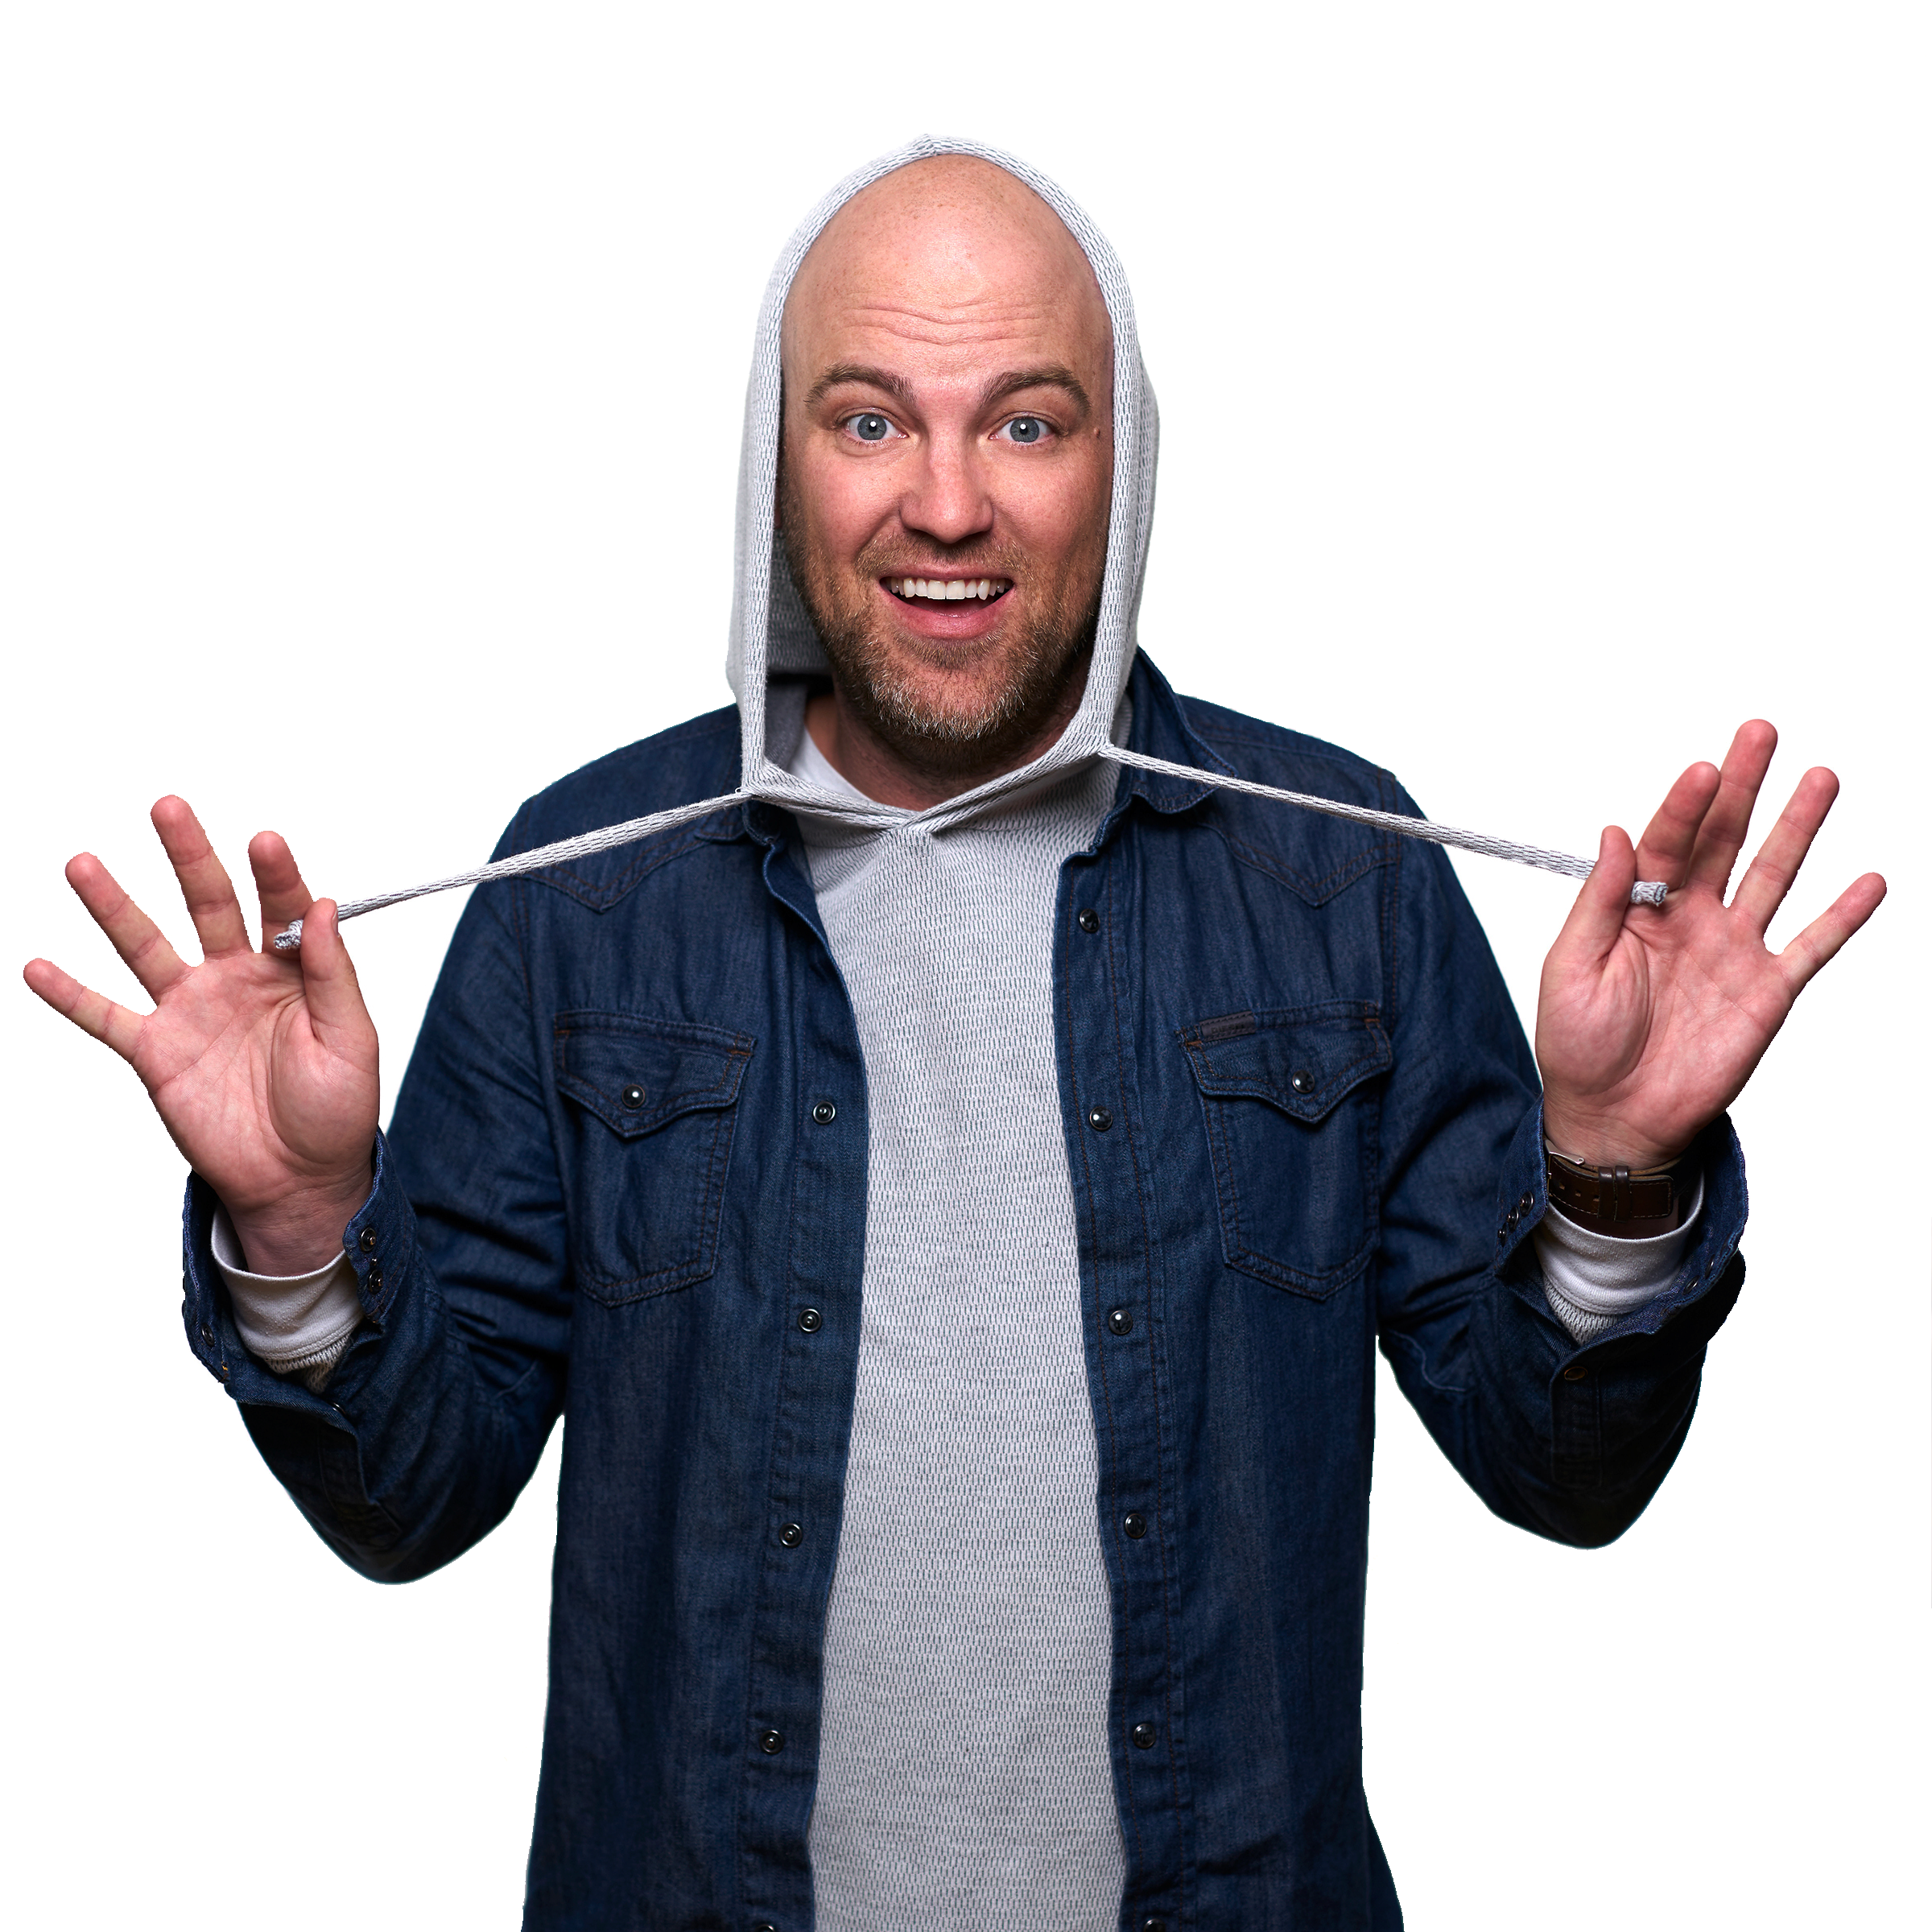 http://everettcomedy.com/wp-content/uploads/2015/12/String-Pull-Headshot-2400x2400.300dpi-no-background.png